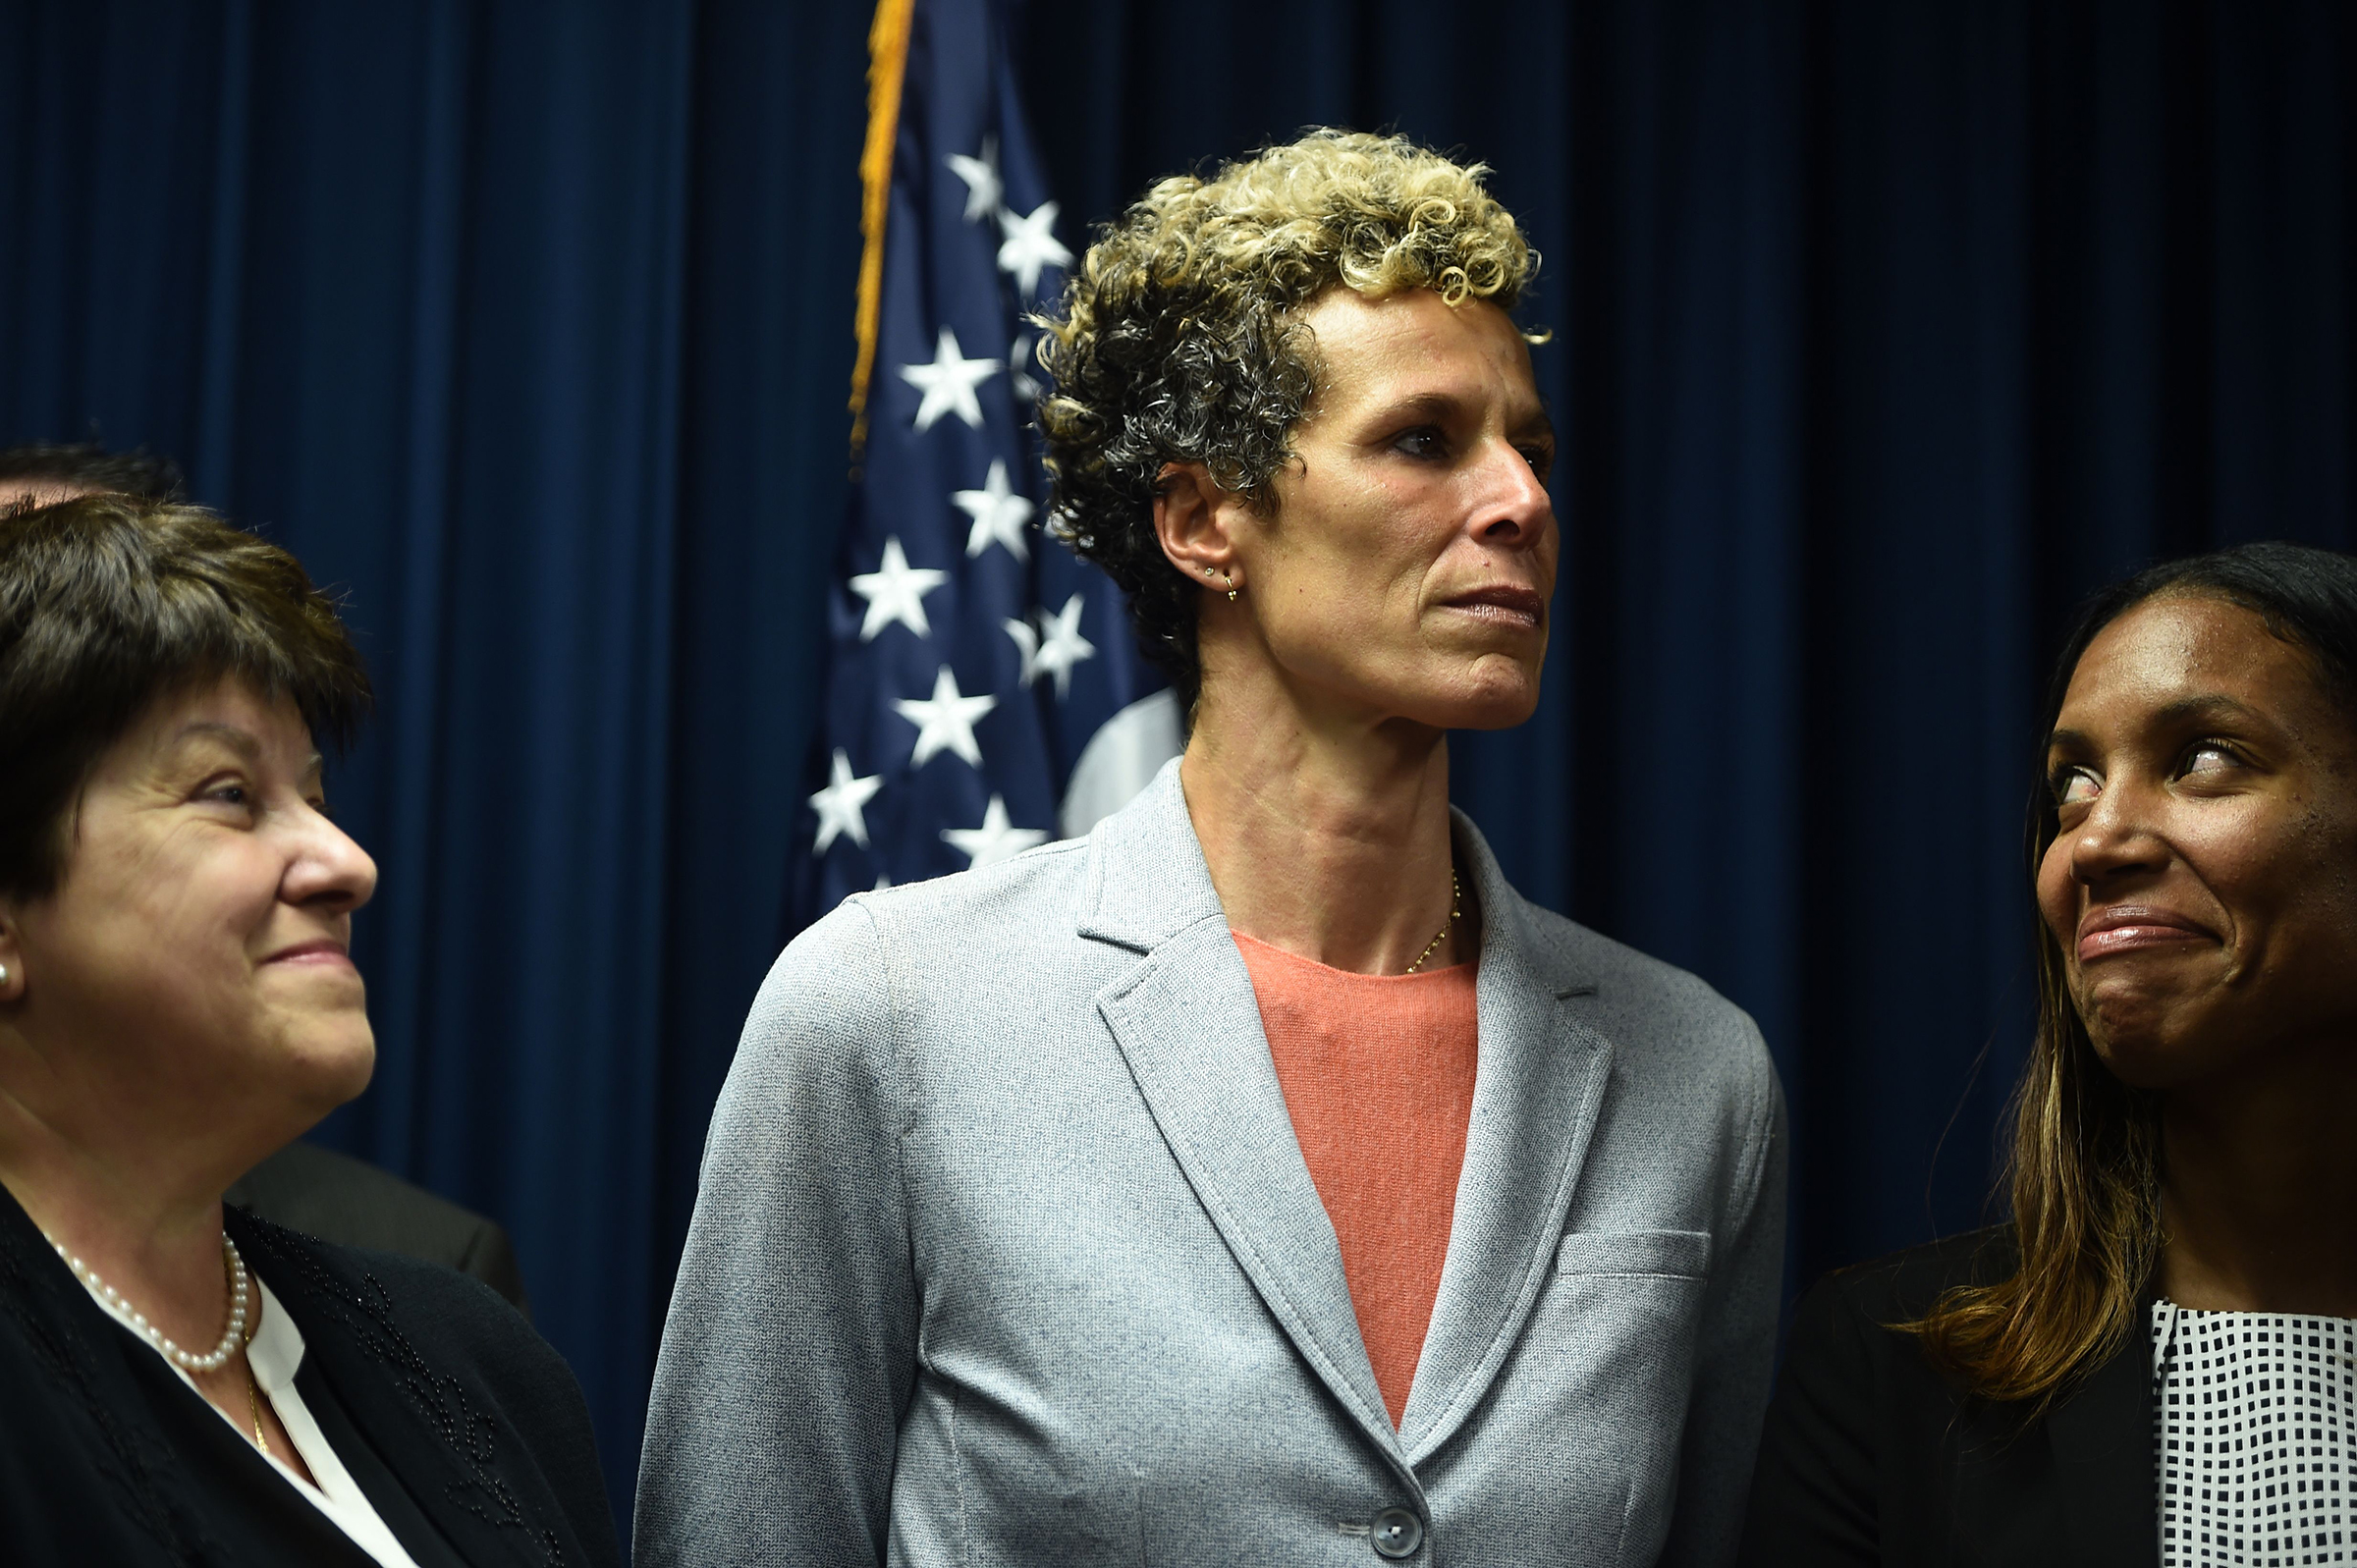 Andrea Constand, center, at a press conference on Sept. 25, 2018 in Norristown, Pa., after comedian Bill Cosby was sentenced to at least three years in prison. (Brendan Smialowski—AFP/Getty Images)